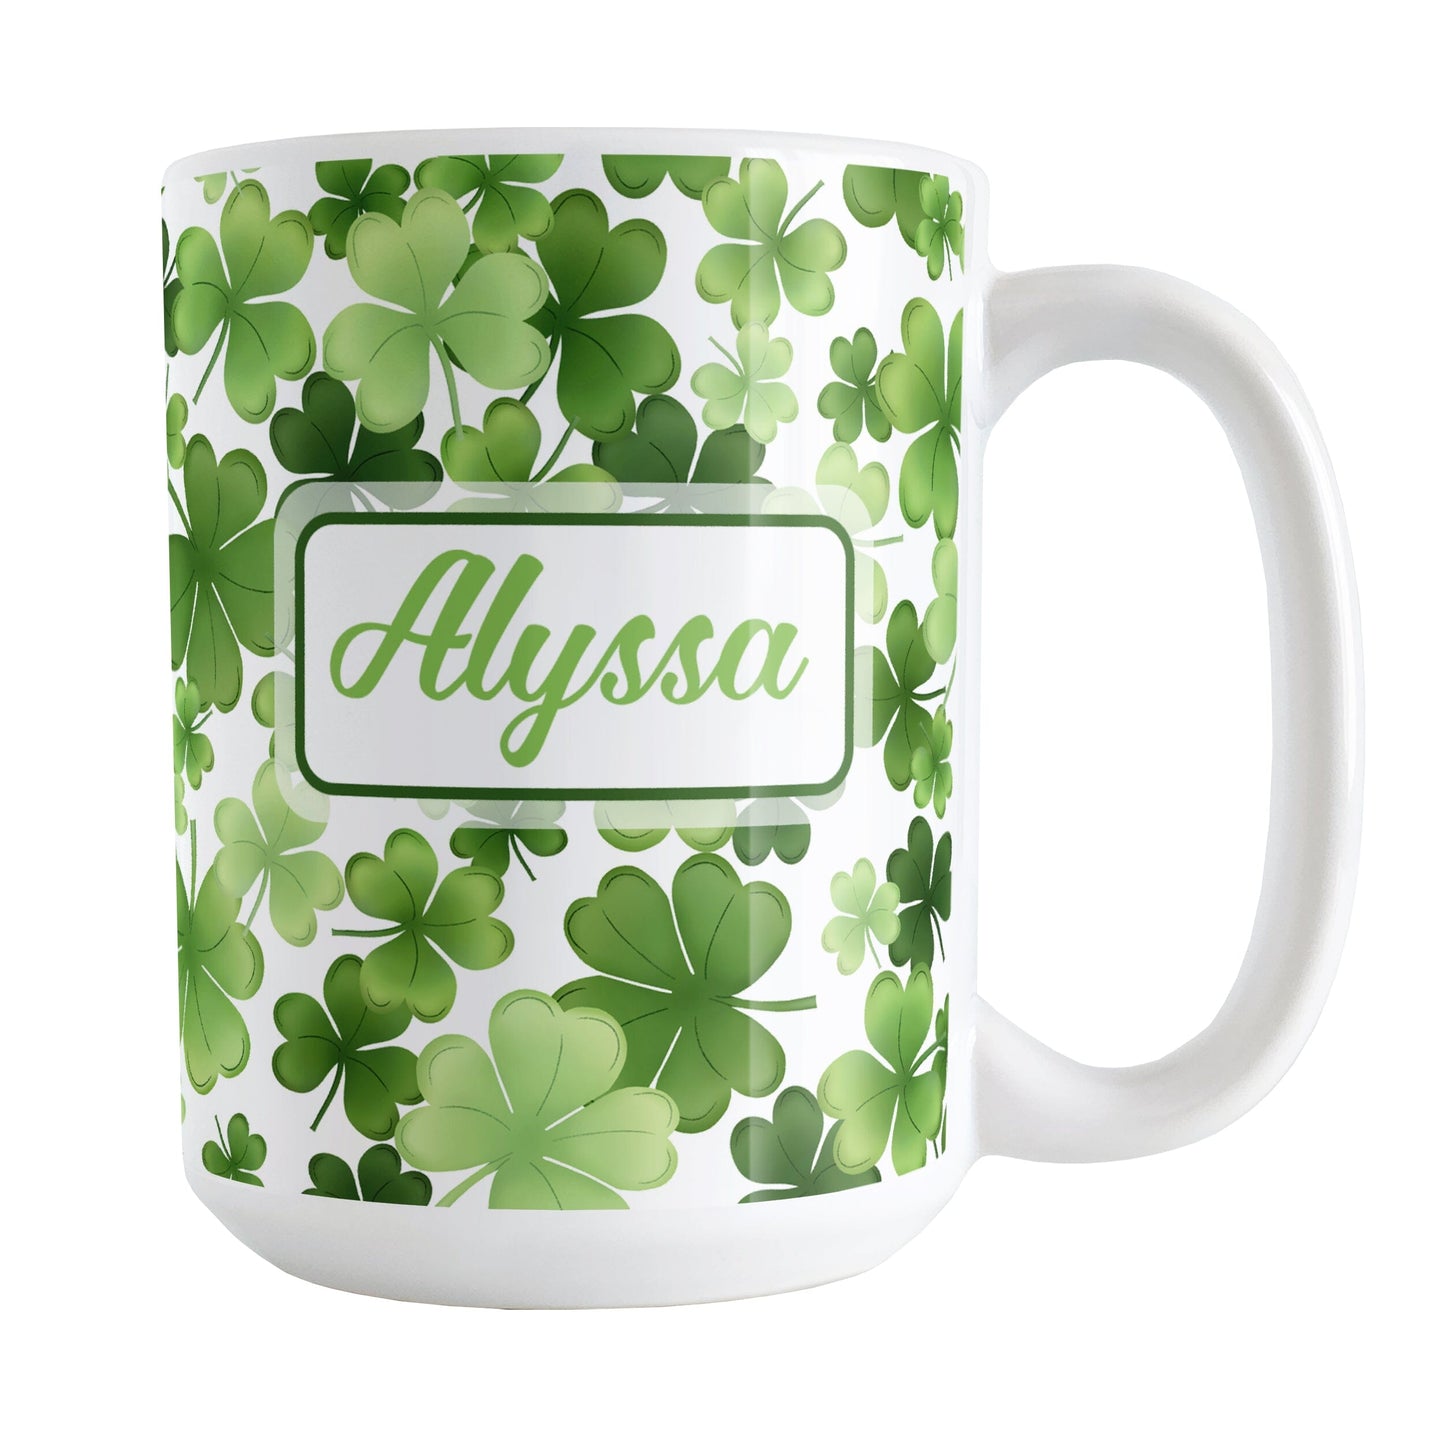 Personalized Shamrocks and 4-Leaf Clovers Mug (15oz) at Amy's Coffee Mugs. A ceramic coffee mug designed with an organic-like pattern of green shamrocks and 4-leaf clovers in different shades of green and is personalized with your name in green on both sides of the mug. This illustrated shamrocks pattern is printed around the mug up to the handle.